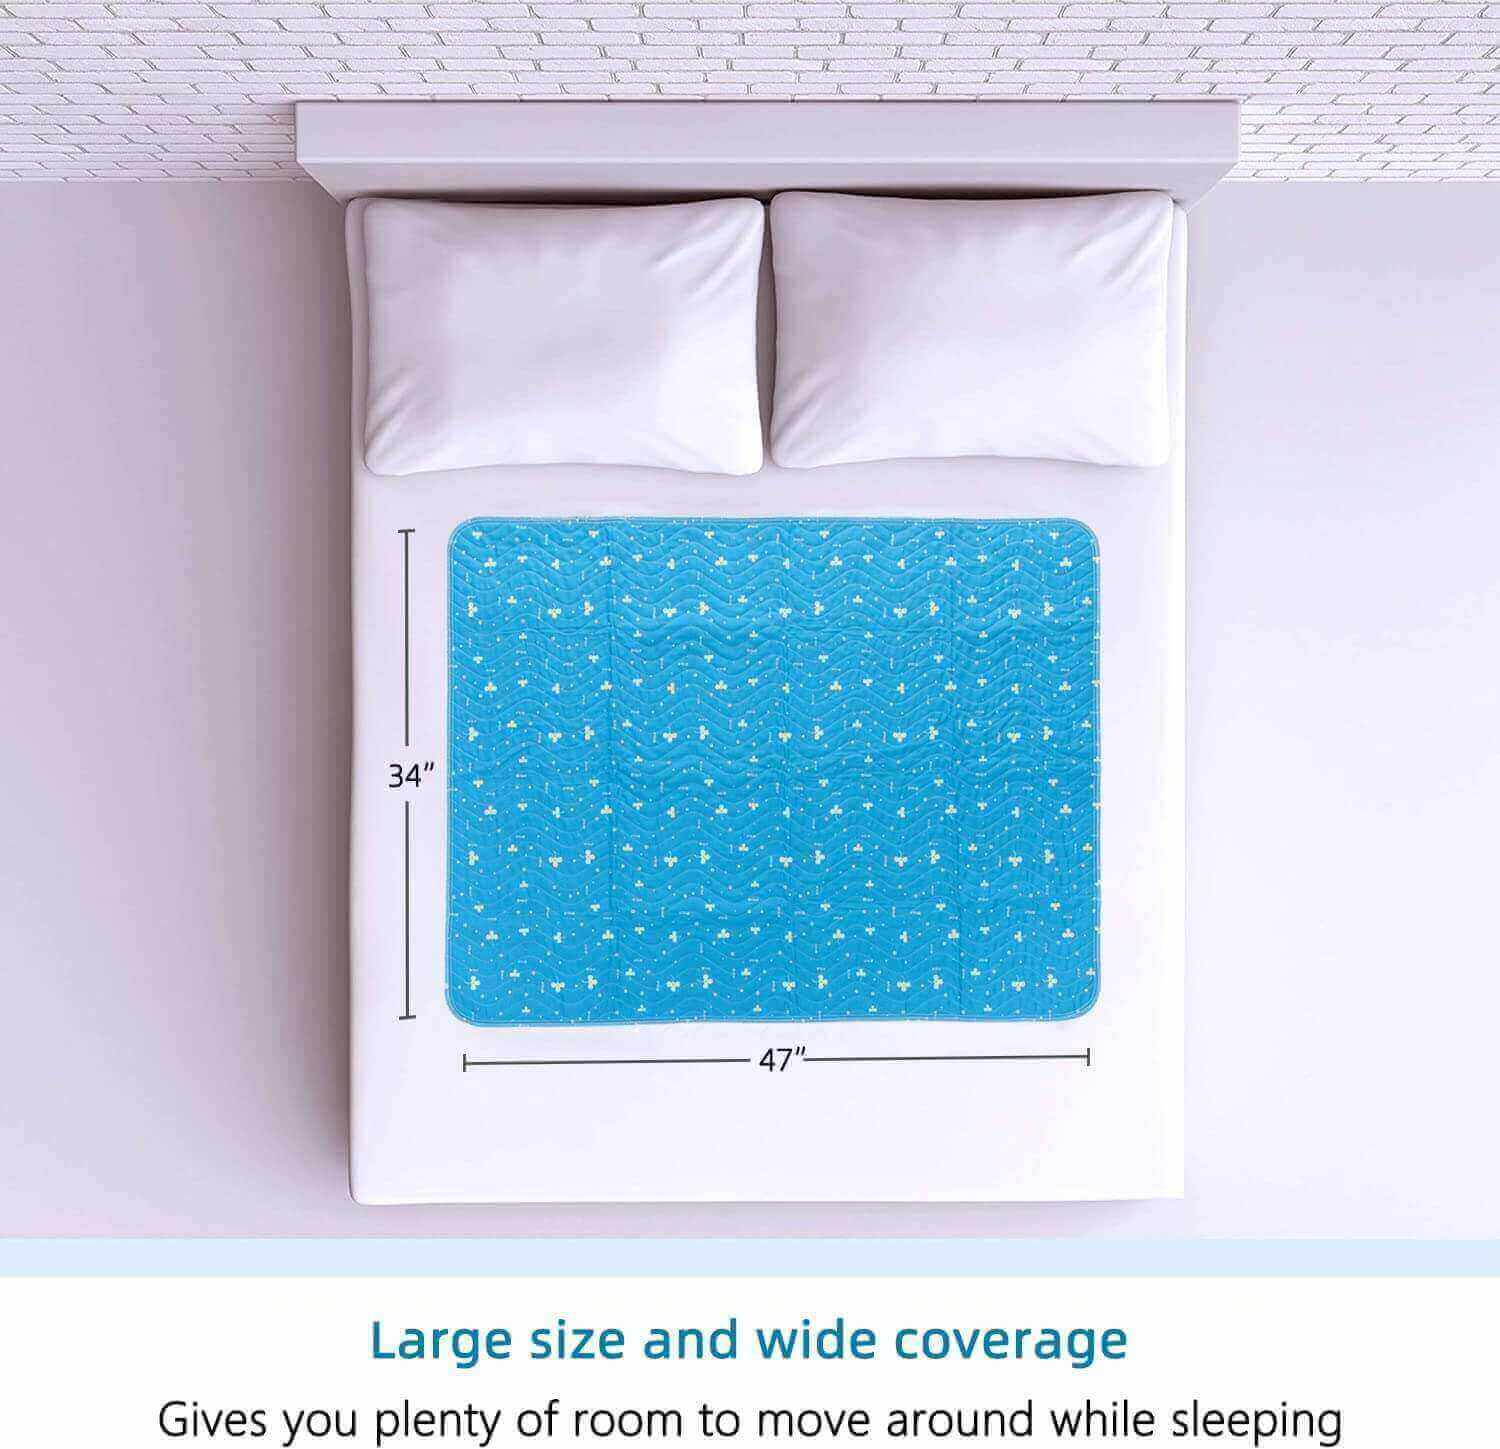 Fanwer incontinence bed pads, specs of the pad